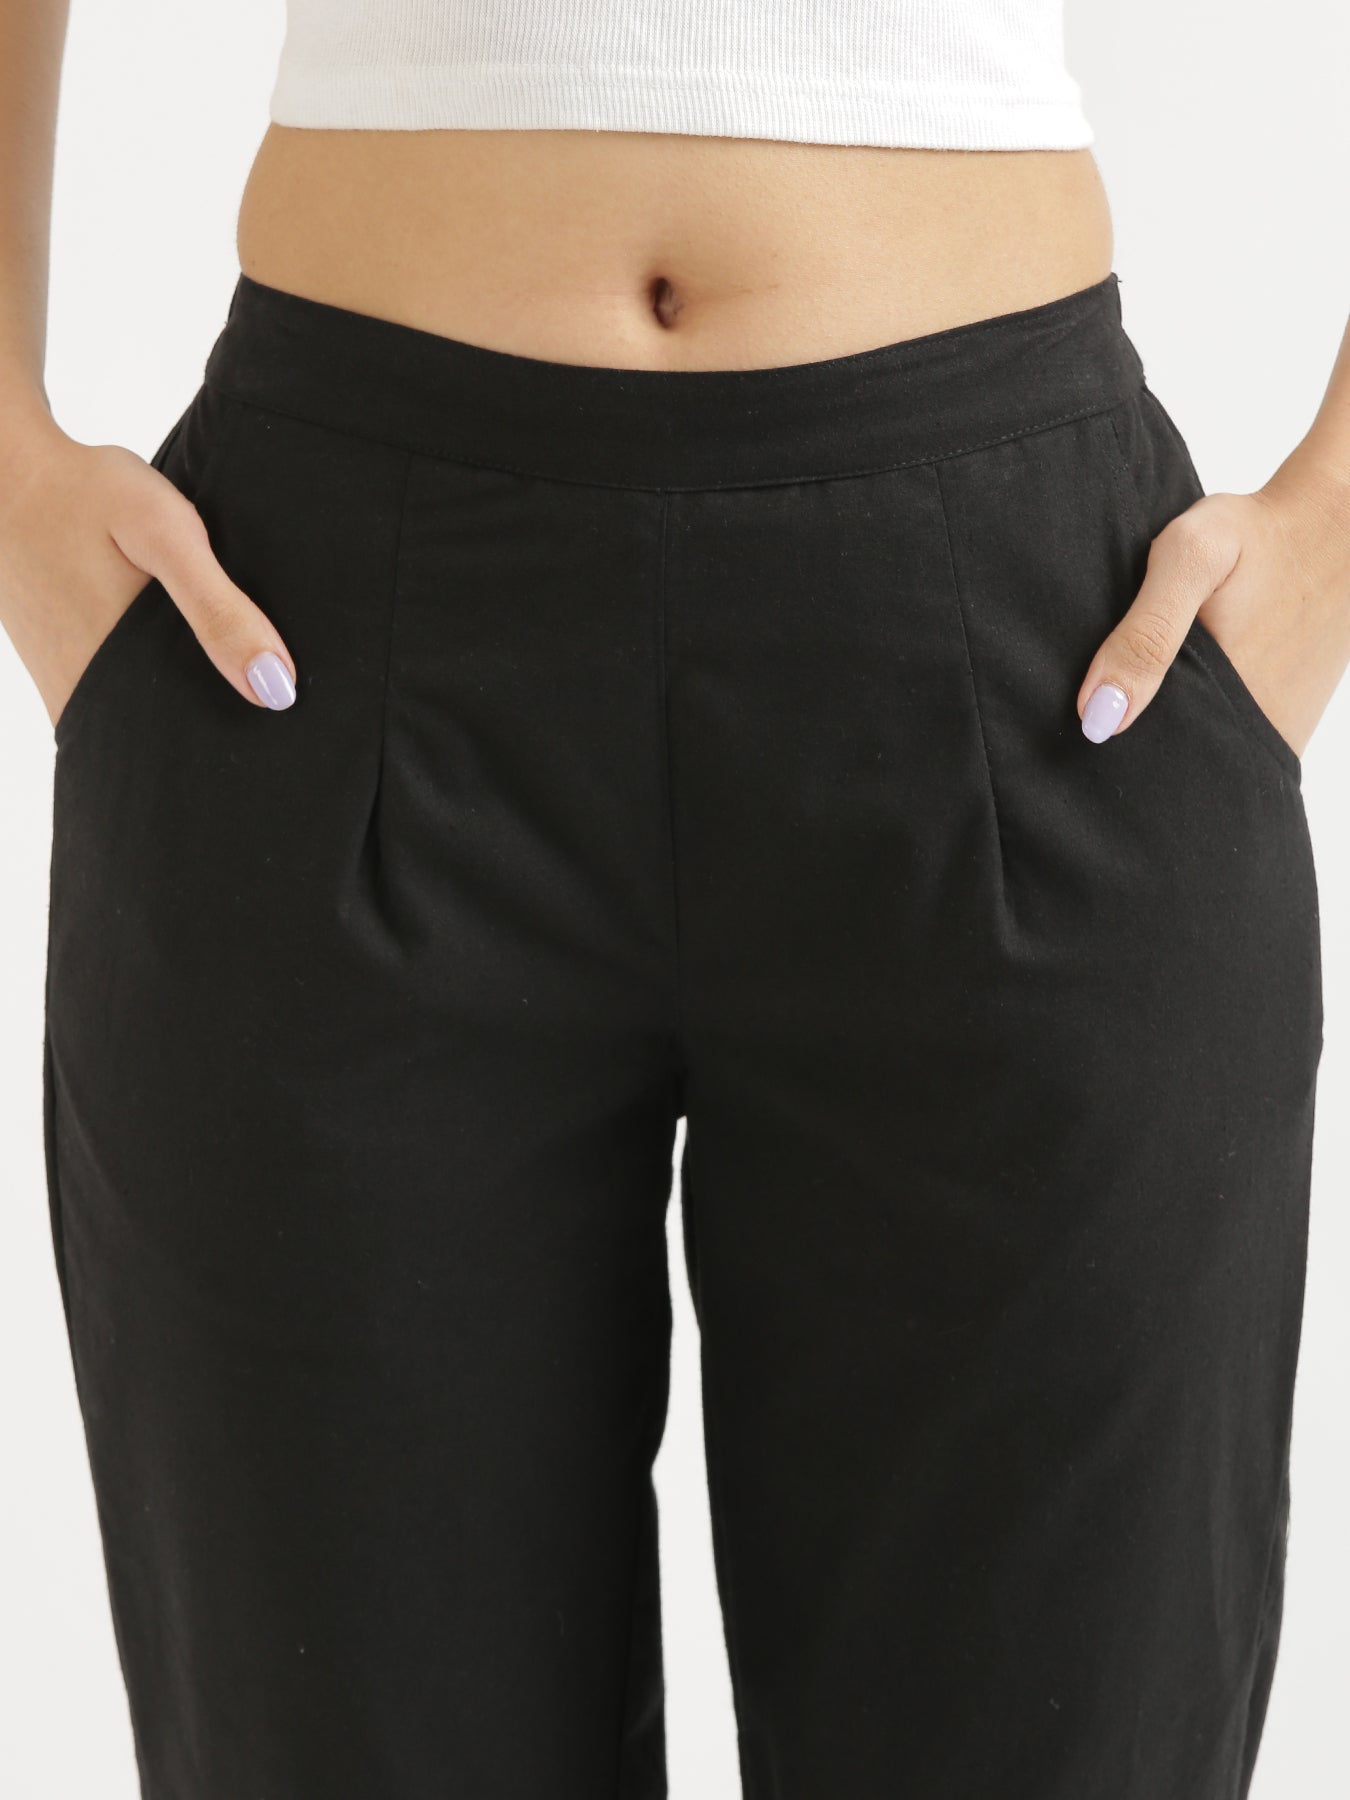 The Best Work Pants for the Stylish Corporate Woman - Sumissura